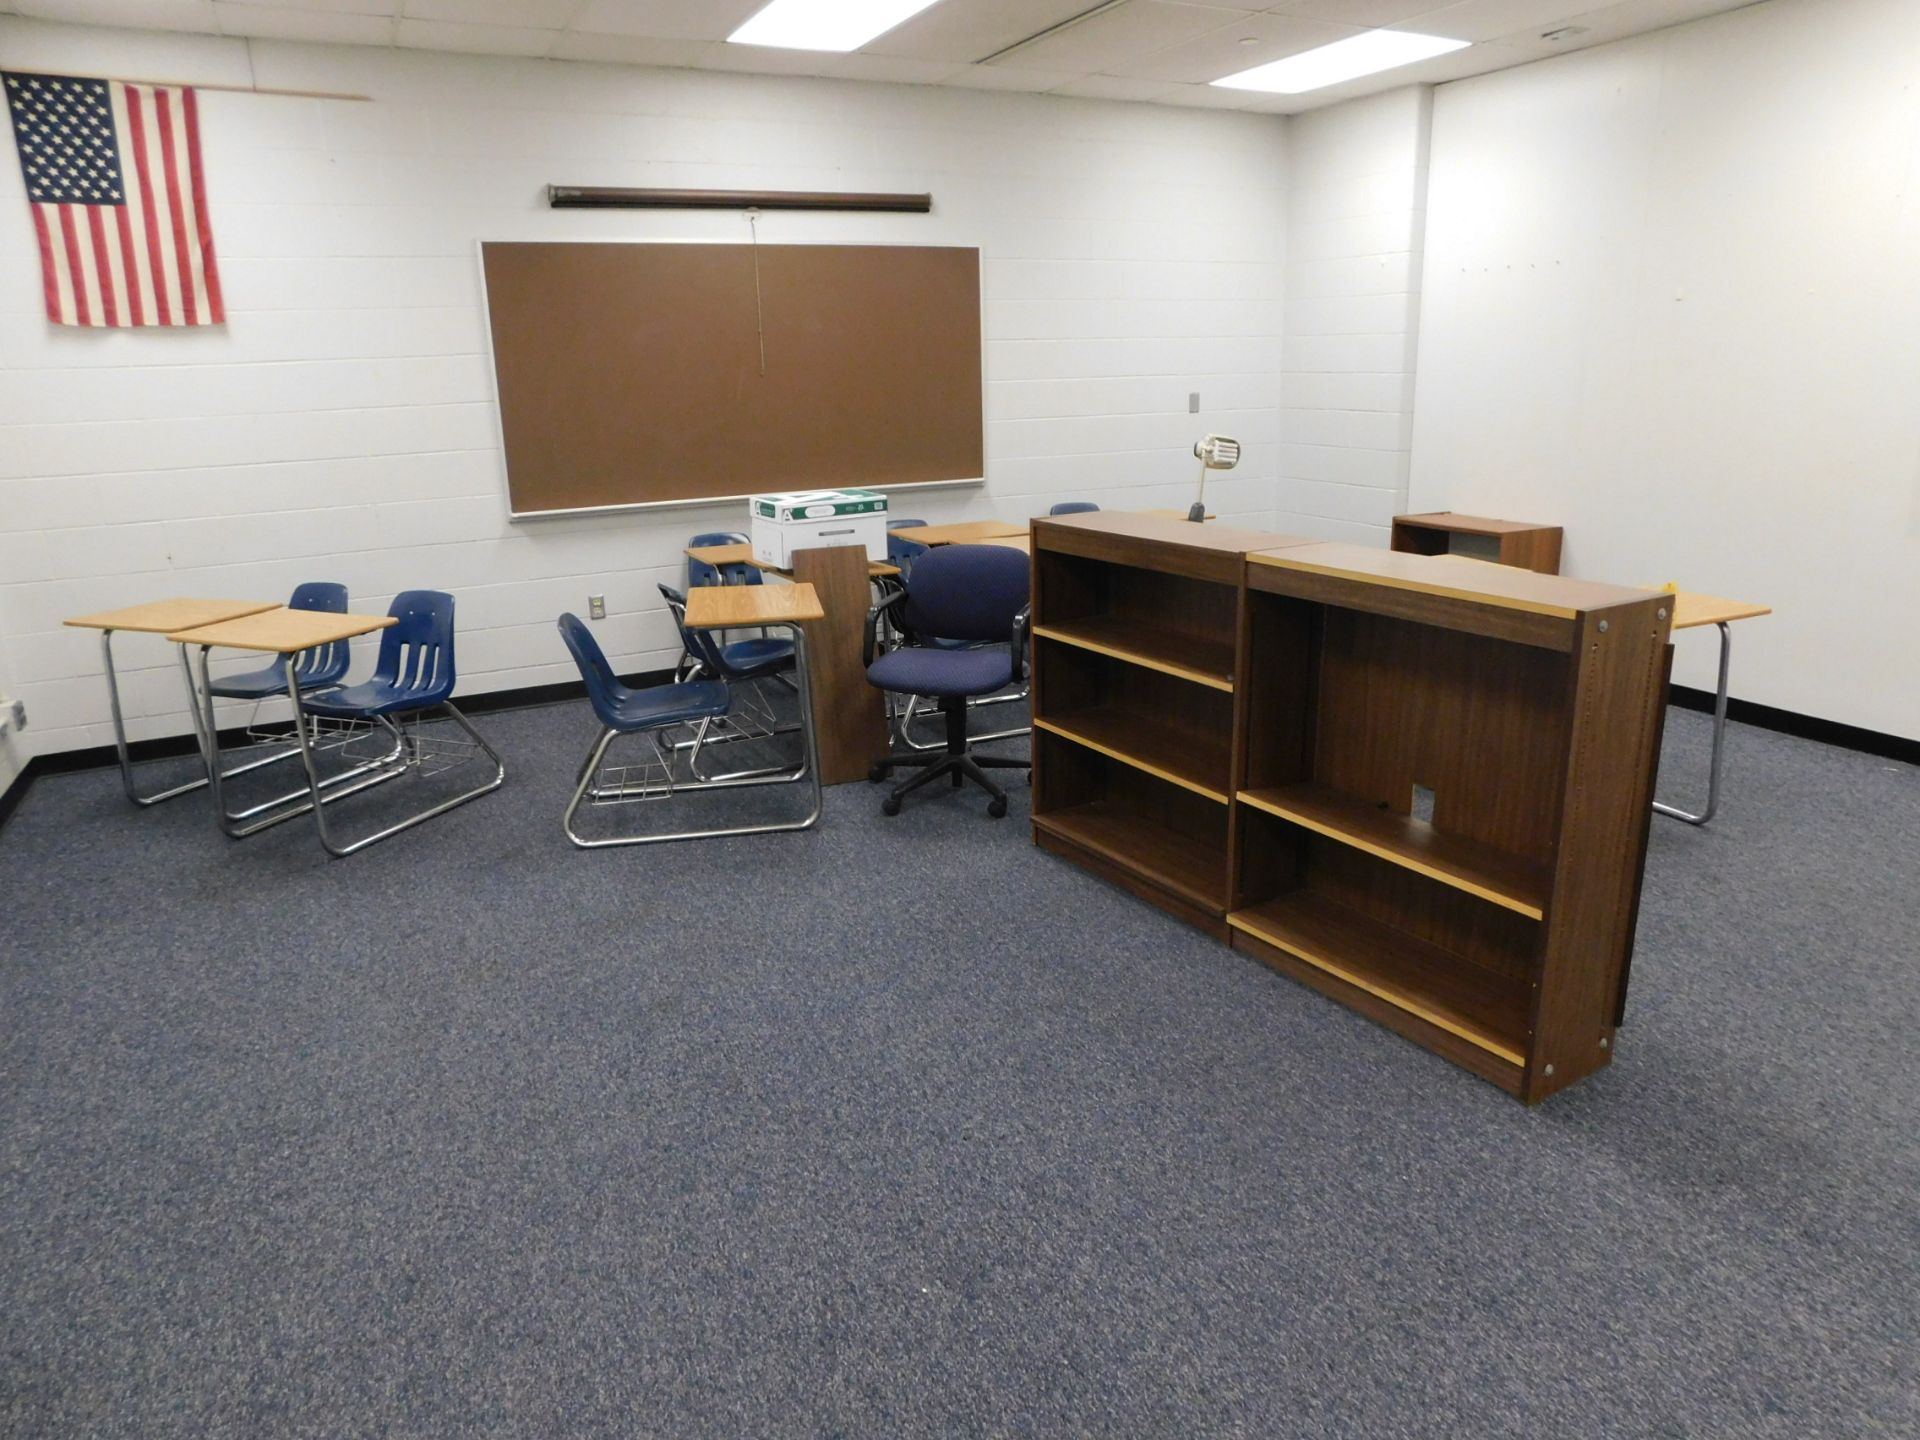 Contents of Room 202, Classroom Desks and Bookcases